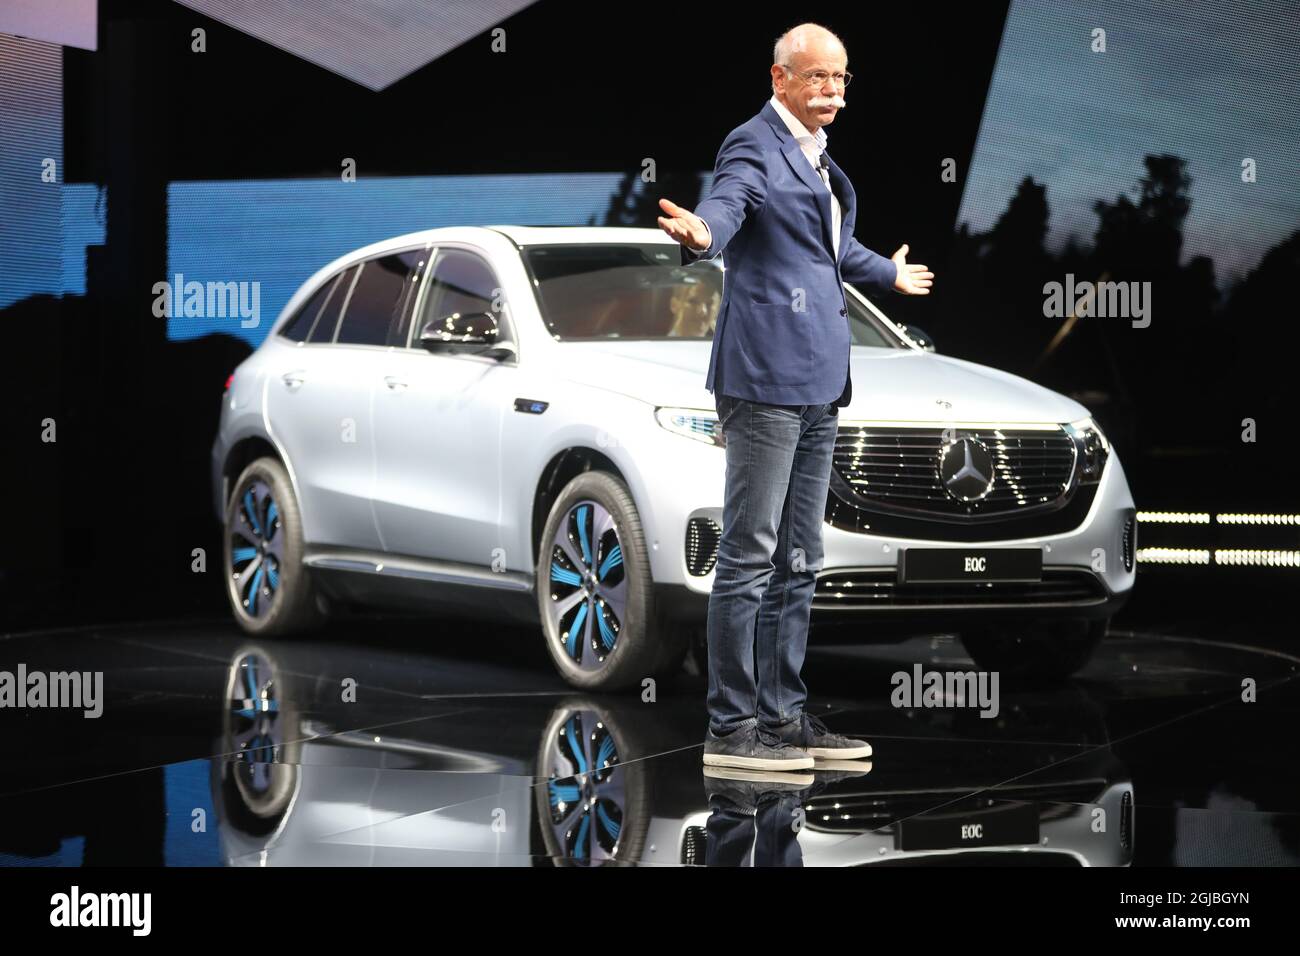 Dieter Zetsche, CEO Daimler AG and Head of Mercedes-Benz Cars, at the unveiling of Mercedes-Benz new electric SUV, the Mercedes EQC, at Artipelag art gallery in Gustavsberg, Stockholm, Sweden on Tuesday Sep. 4, 2018. Photo Soren Andersson / TT code1037 Stock Photo